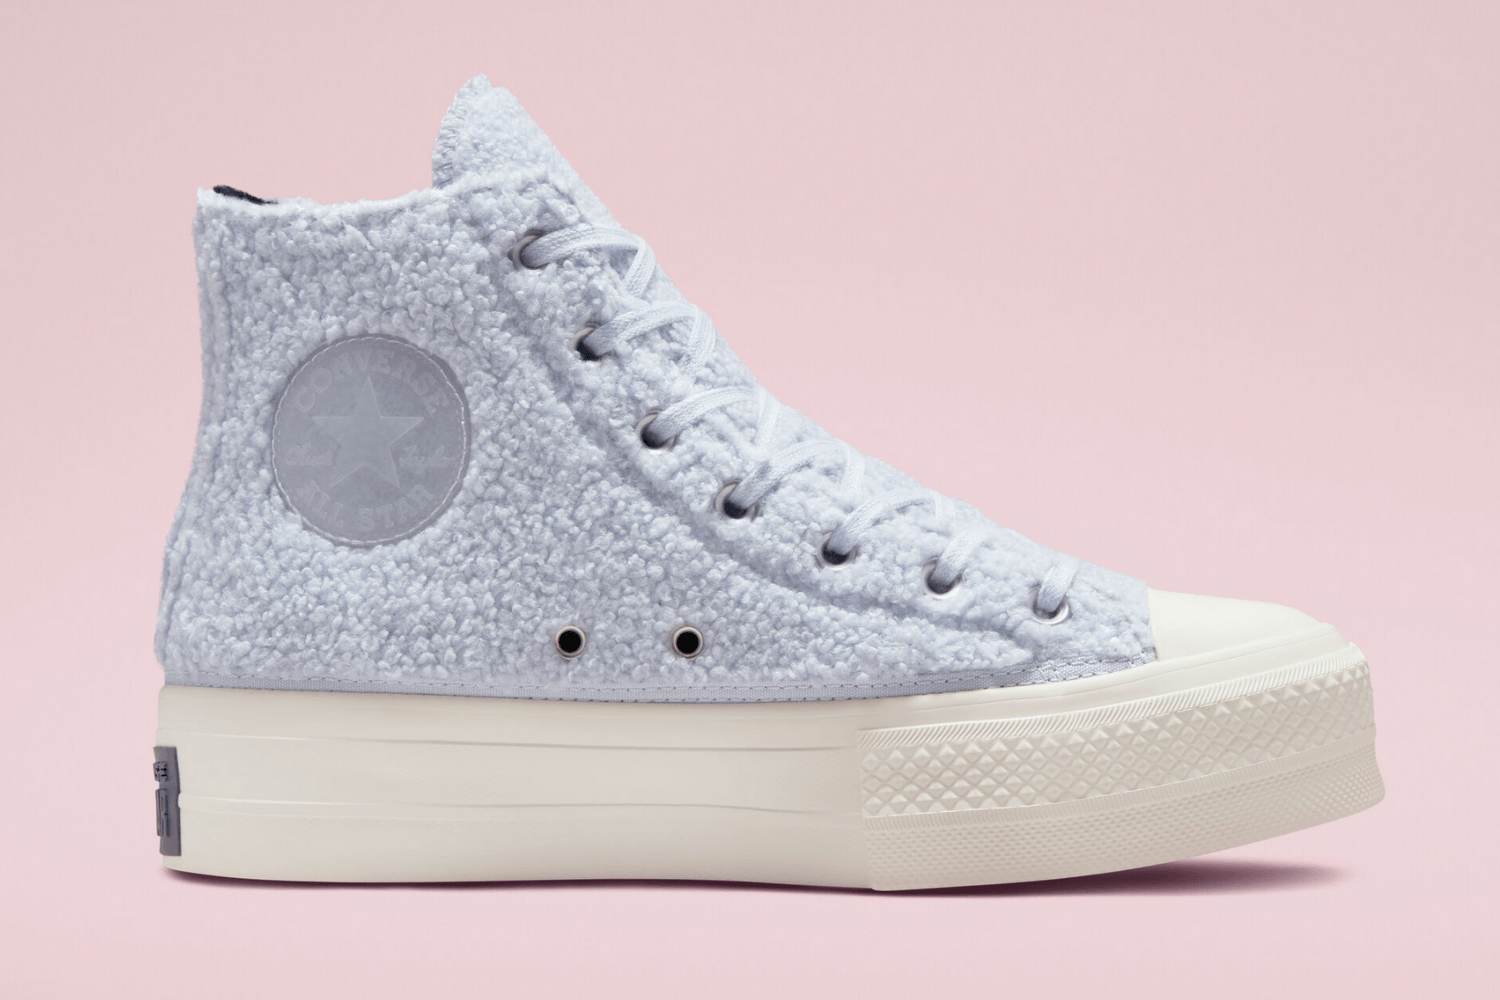 Get winter-ready with the Converse 'Cozy' sneakers